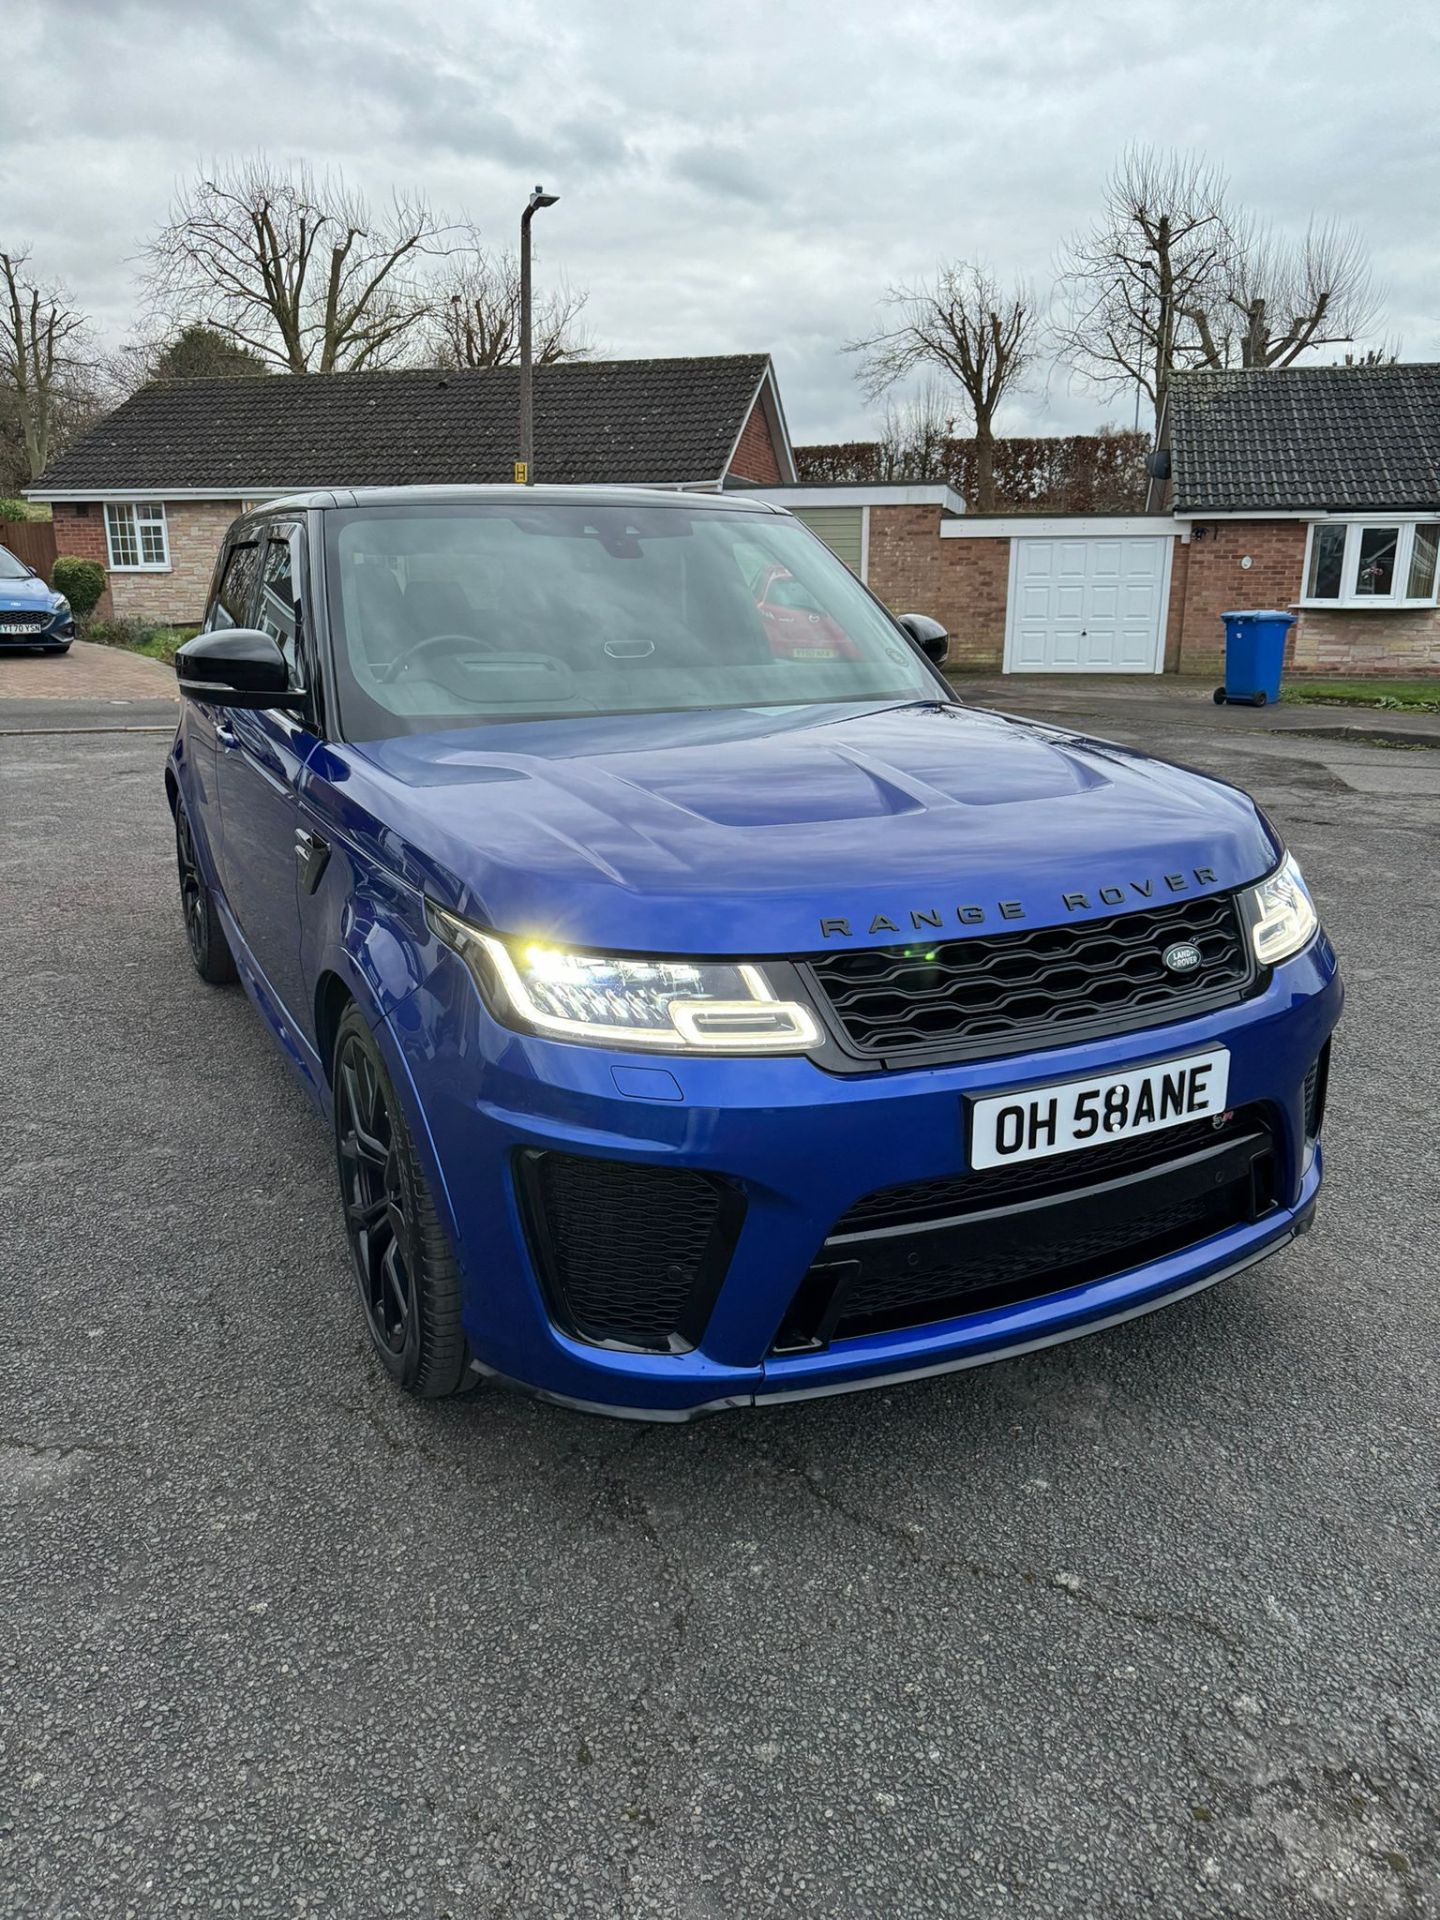 2018 18 RANGE ROVER SVR - 62K MILES WITH FULL LAND ROVER HISTORY - EXTREMELY CLEAN EXAMPLE. - Bild 2 aus 10